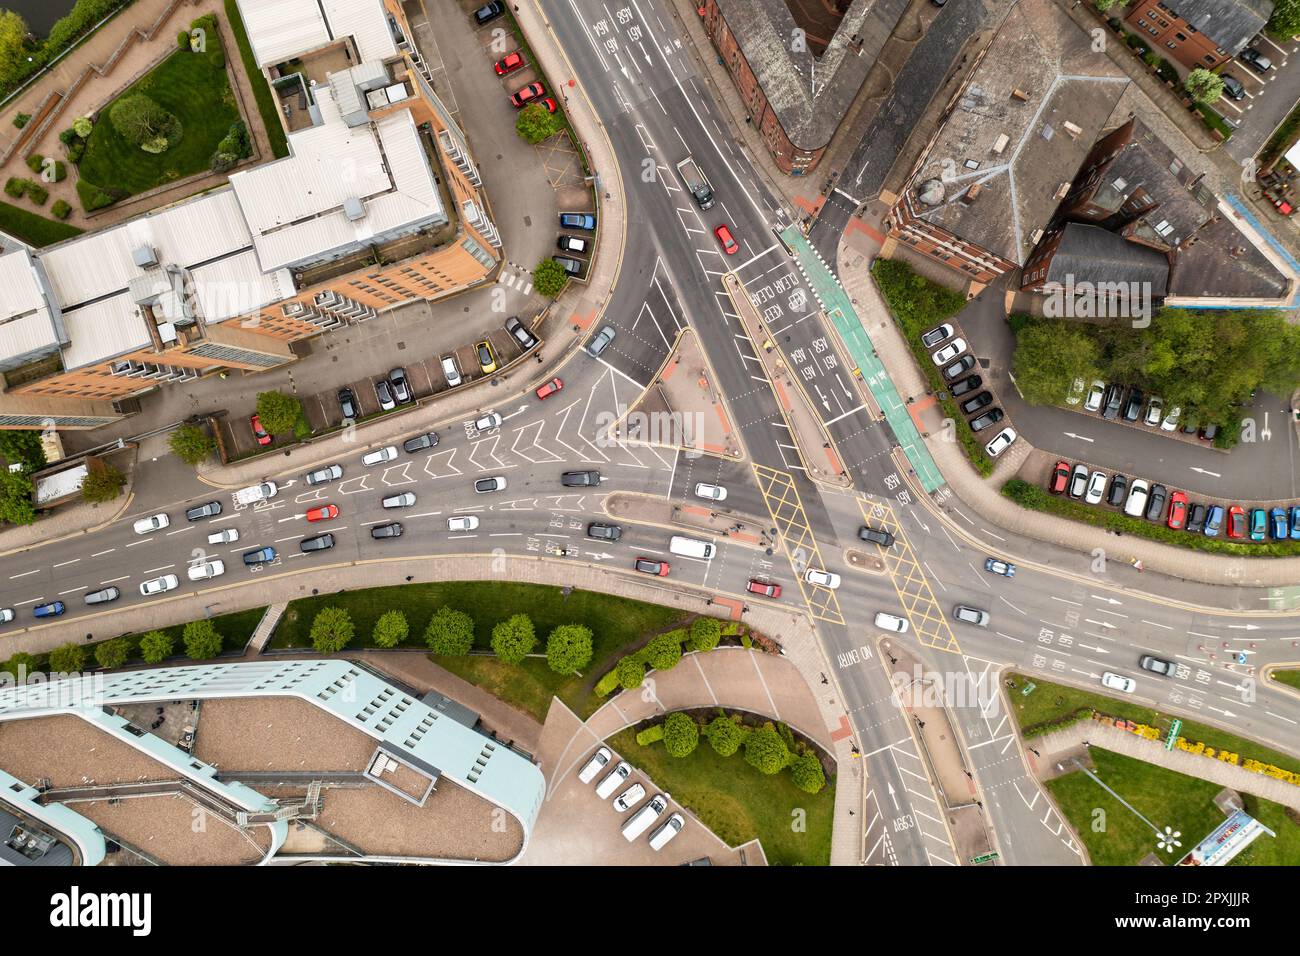 Aerial view directly above a complex road junction or intersection with ...